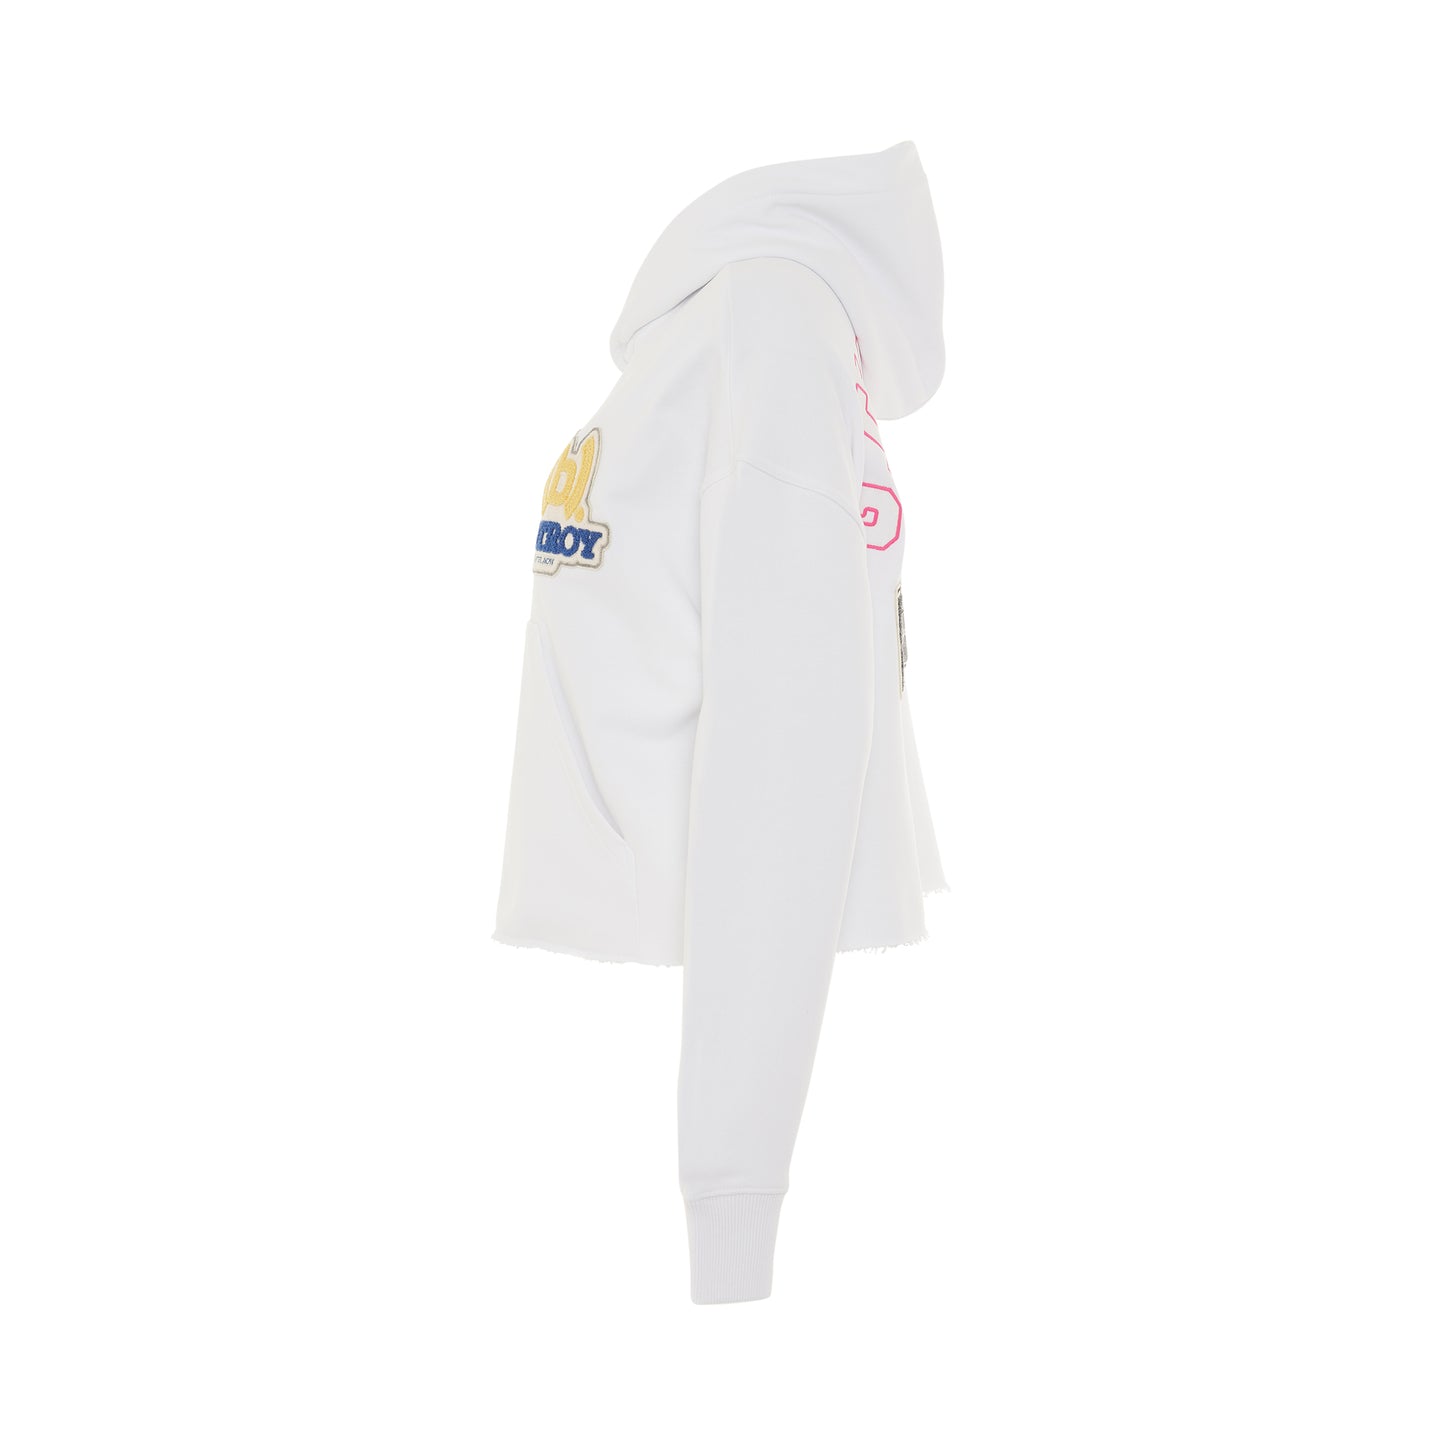 BSTROY Embroidered Patch Cropped Hoodie in White